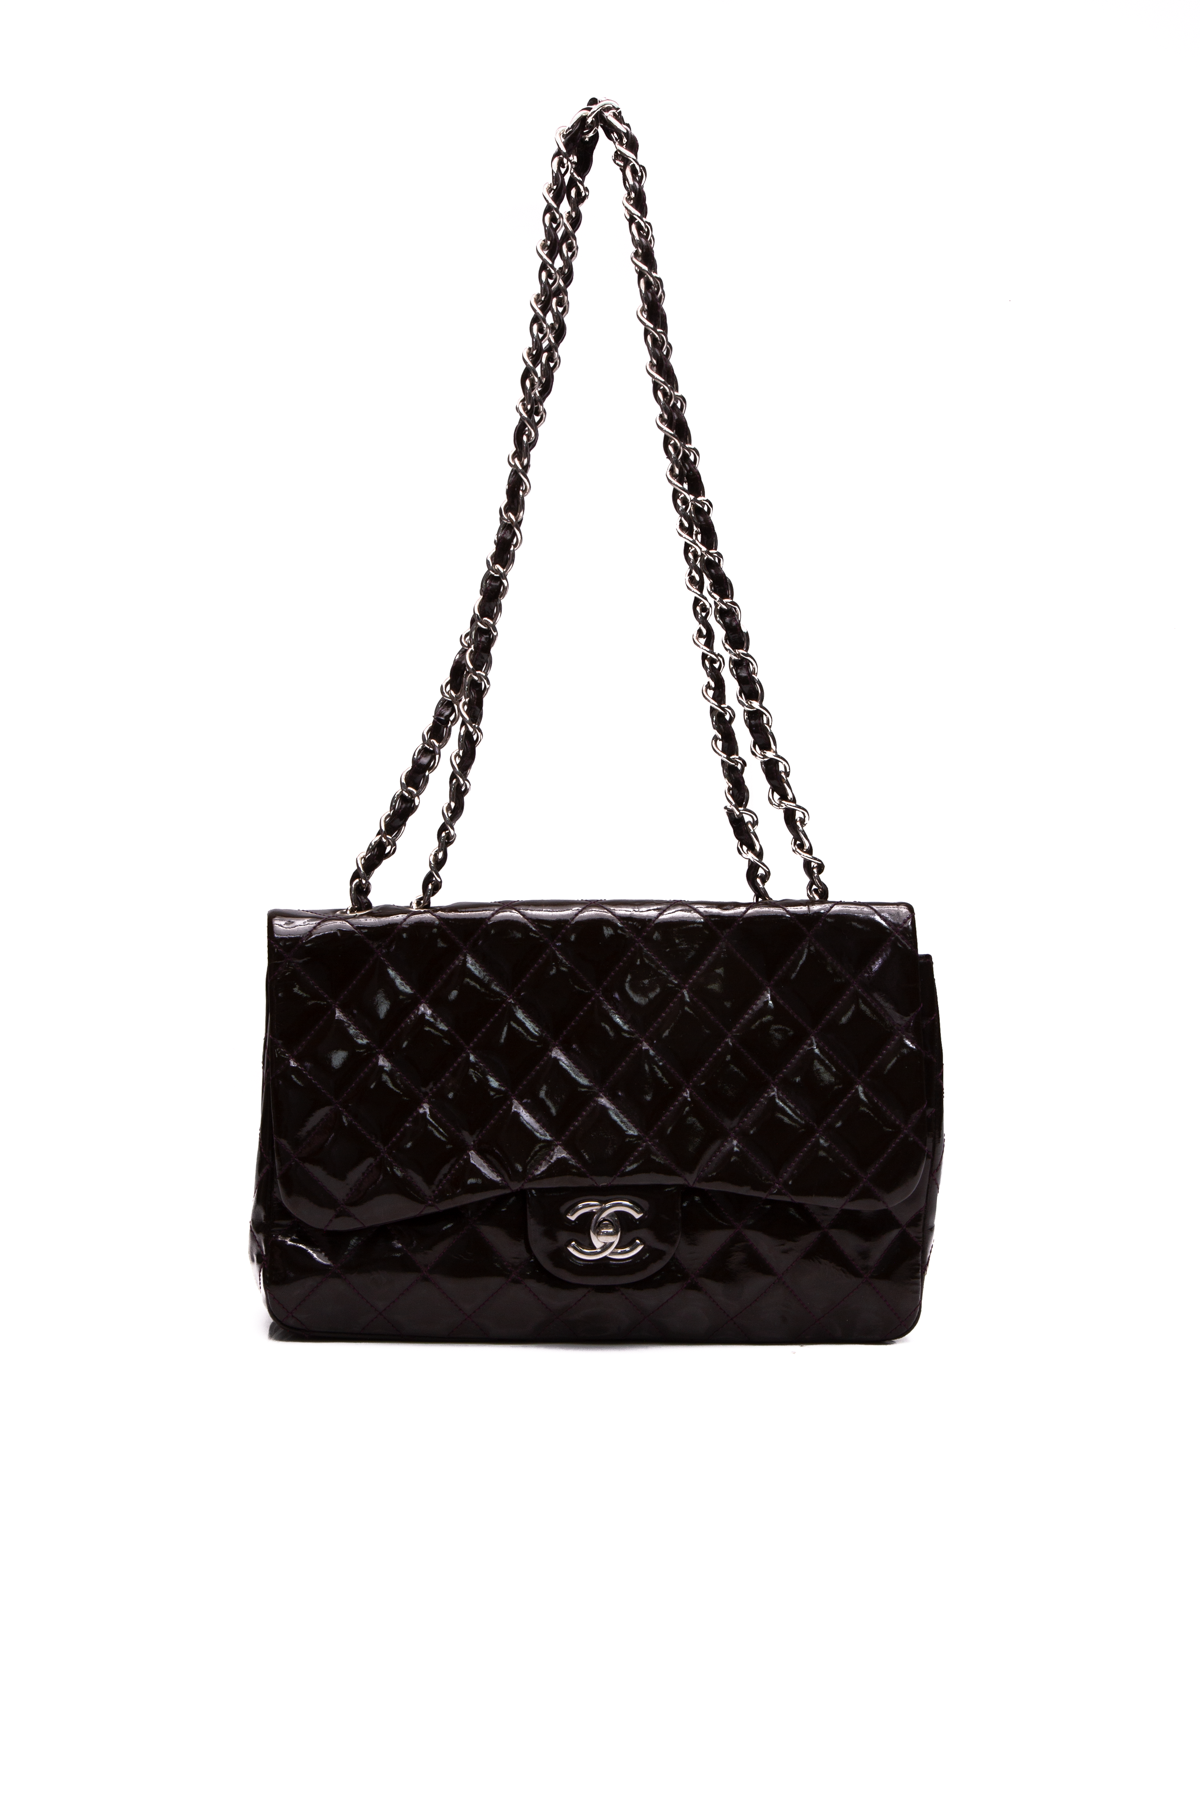 Chanel Classic Single Flap Bag Quilted Caviar Jumbo Gray 2383791